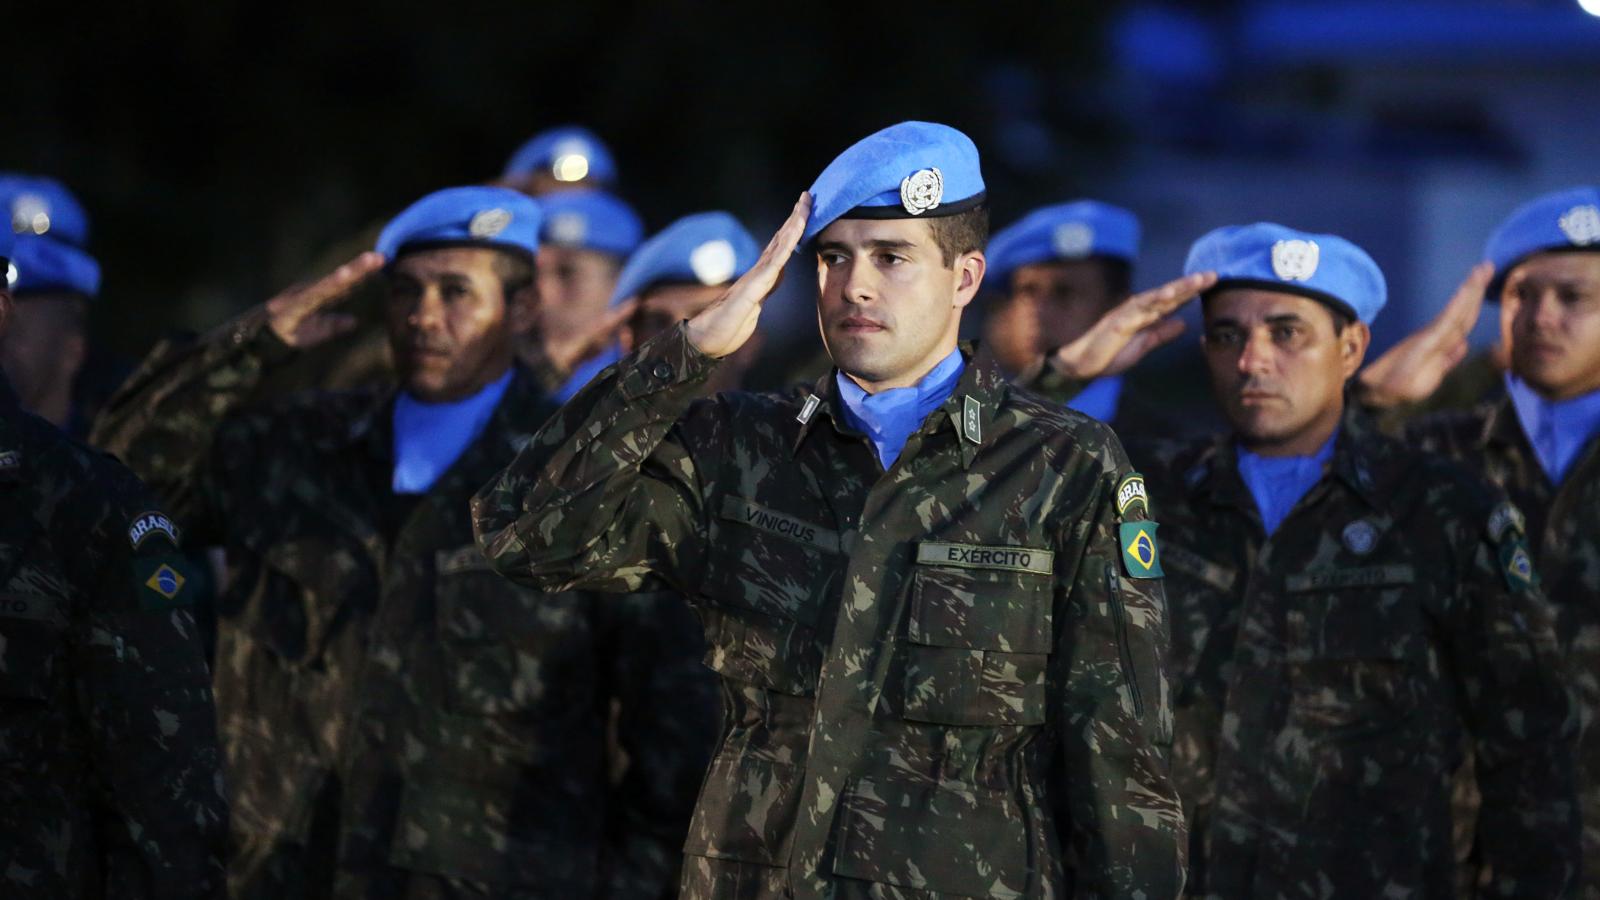 [REPORT] The Italian Participation in Peacekeeping Operations